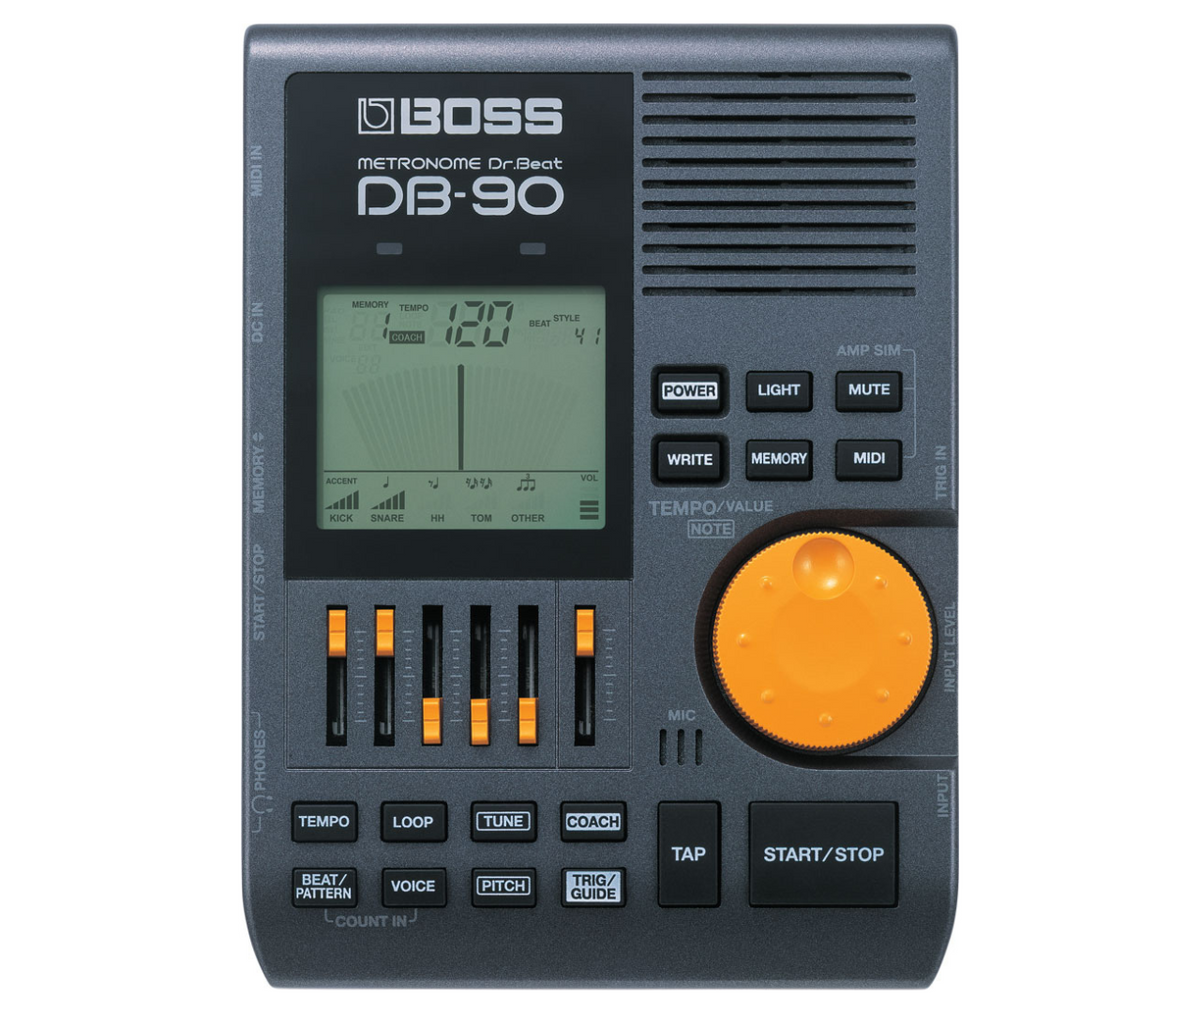 BOSS DB-90 Dr. Beat Best Metronome Beat Counter Portable Timekeeper with Tap Tempo and Rhythm Coach Function and Footswitch Control